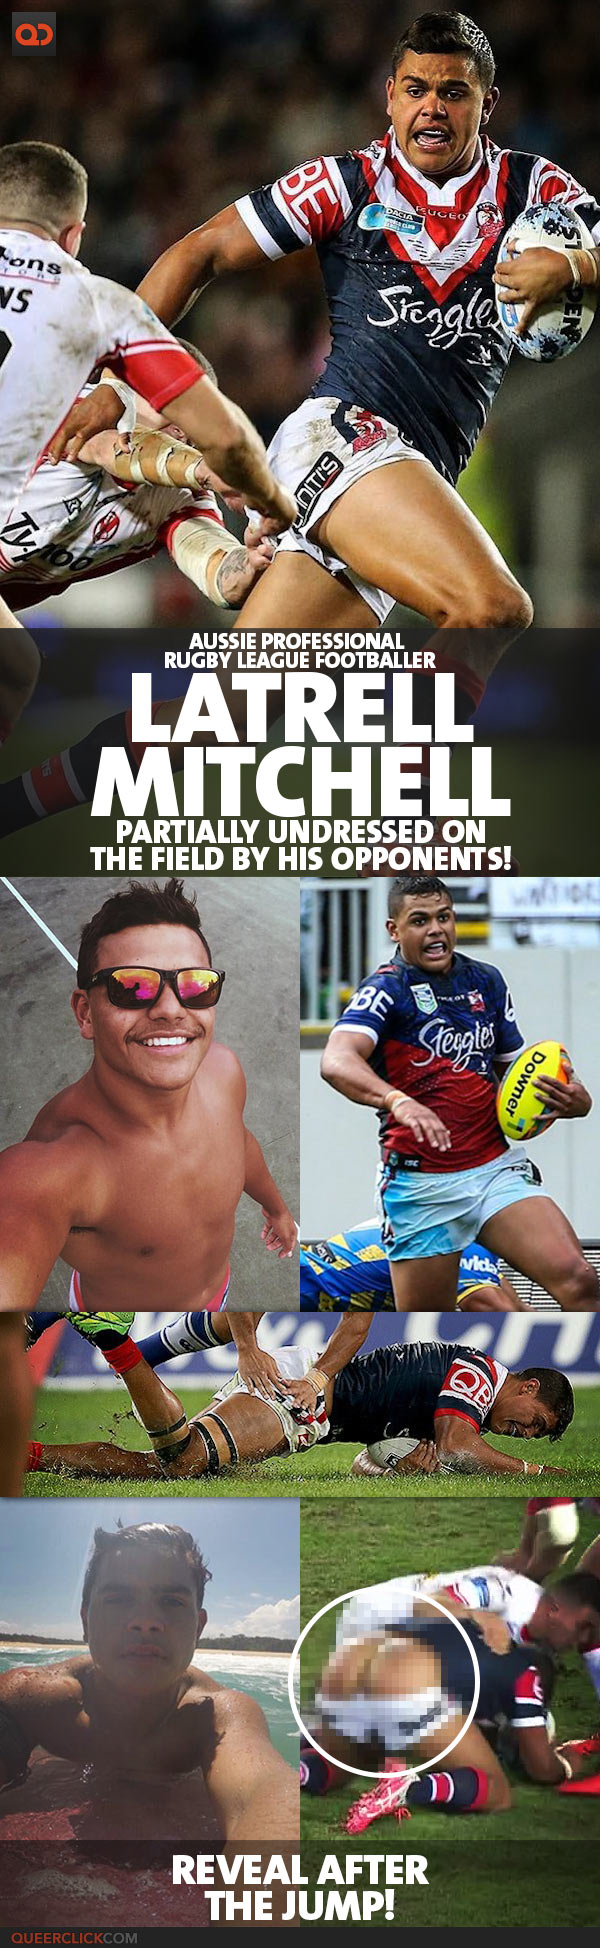 qc-latrell_mitchell_aussie_pro_rugby_footballer_undressed_on_the_field_by_opponents-teaser